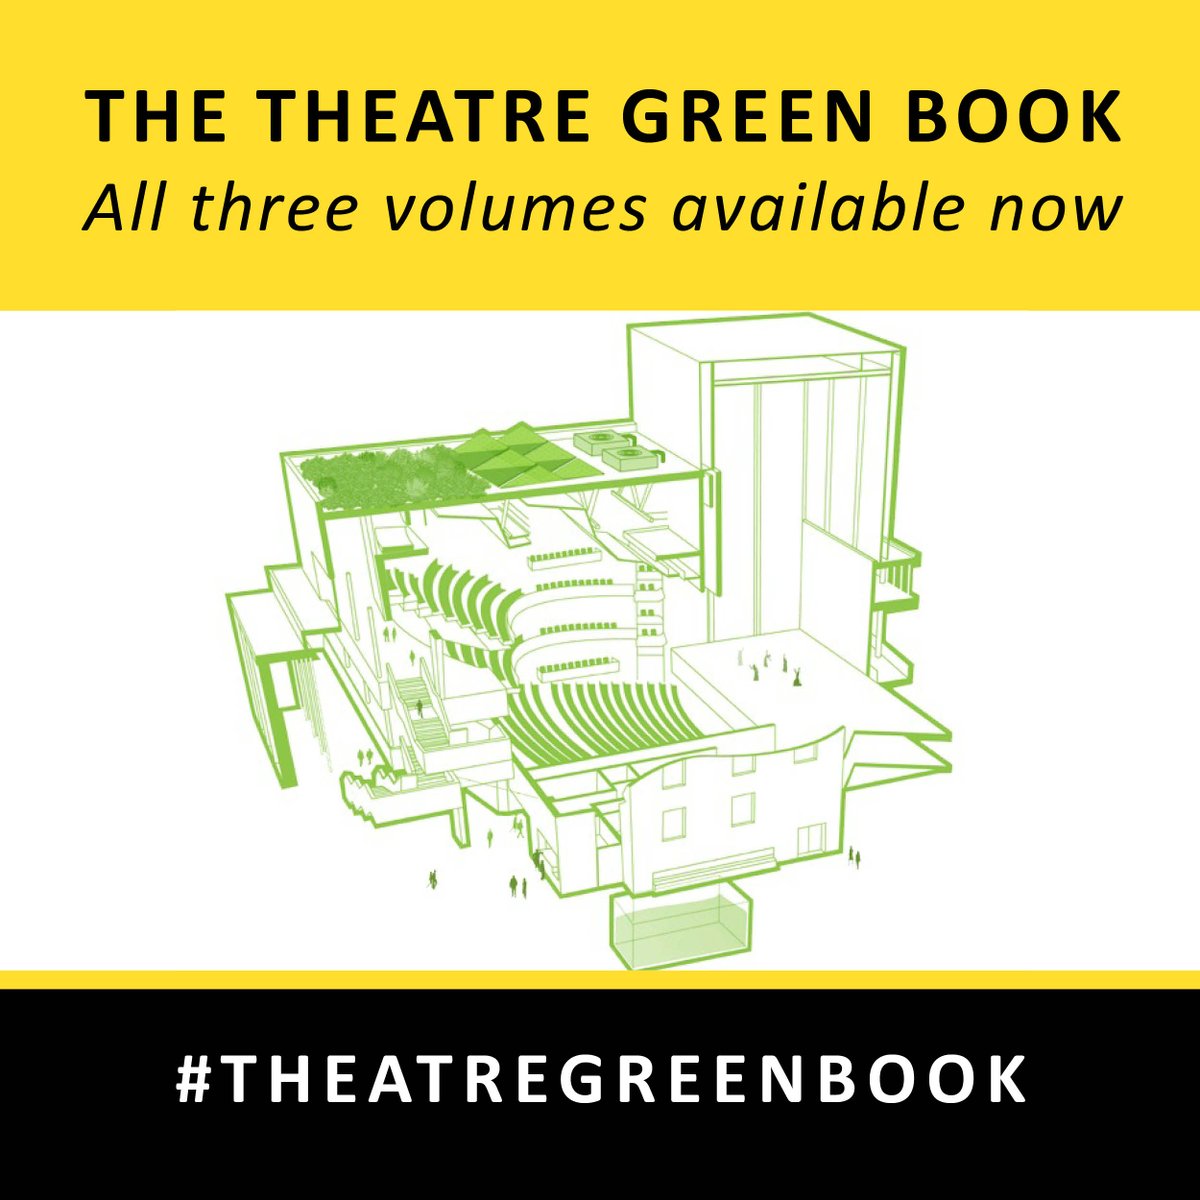 The #TheatreGreenBook, spearheaded by the ABTT & Theatres Trust is helping to create a common standard for making theatre green! All Three volumes are now available to trial here: theatregreenbook.com  #MakingTheatreSustainable #ABTT